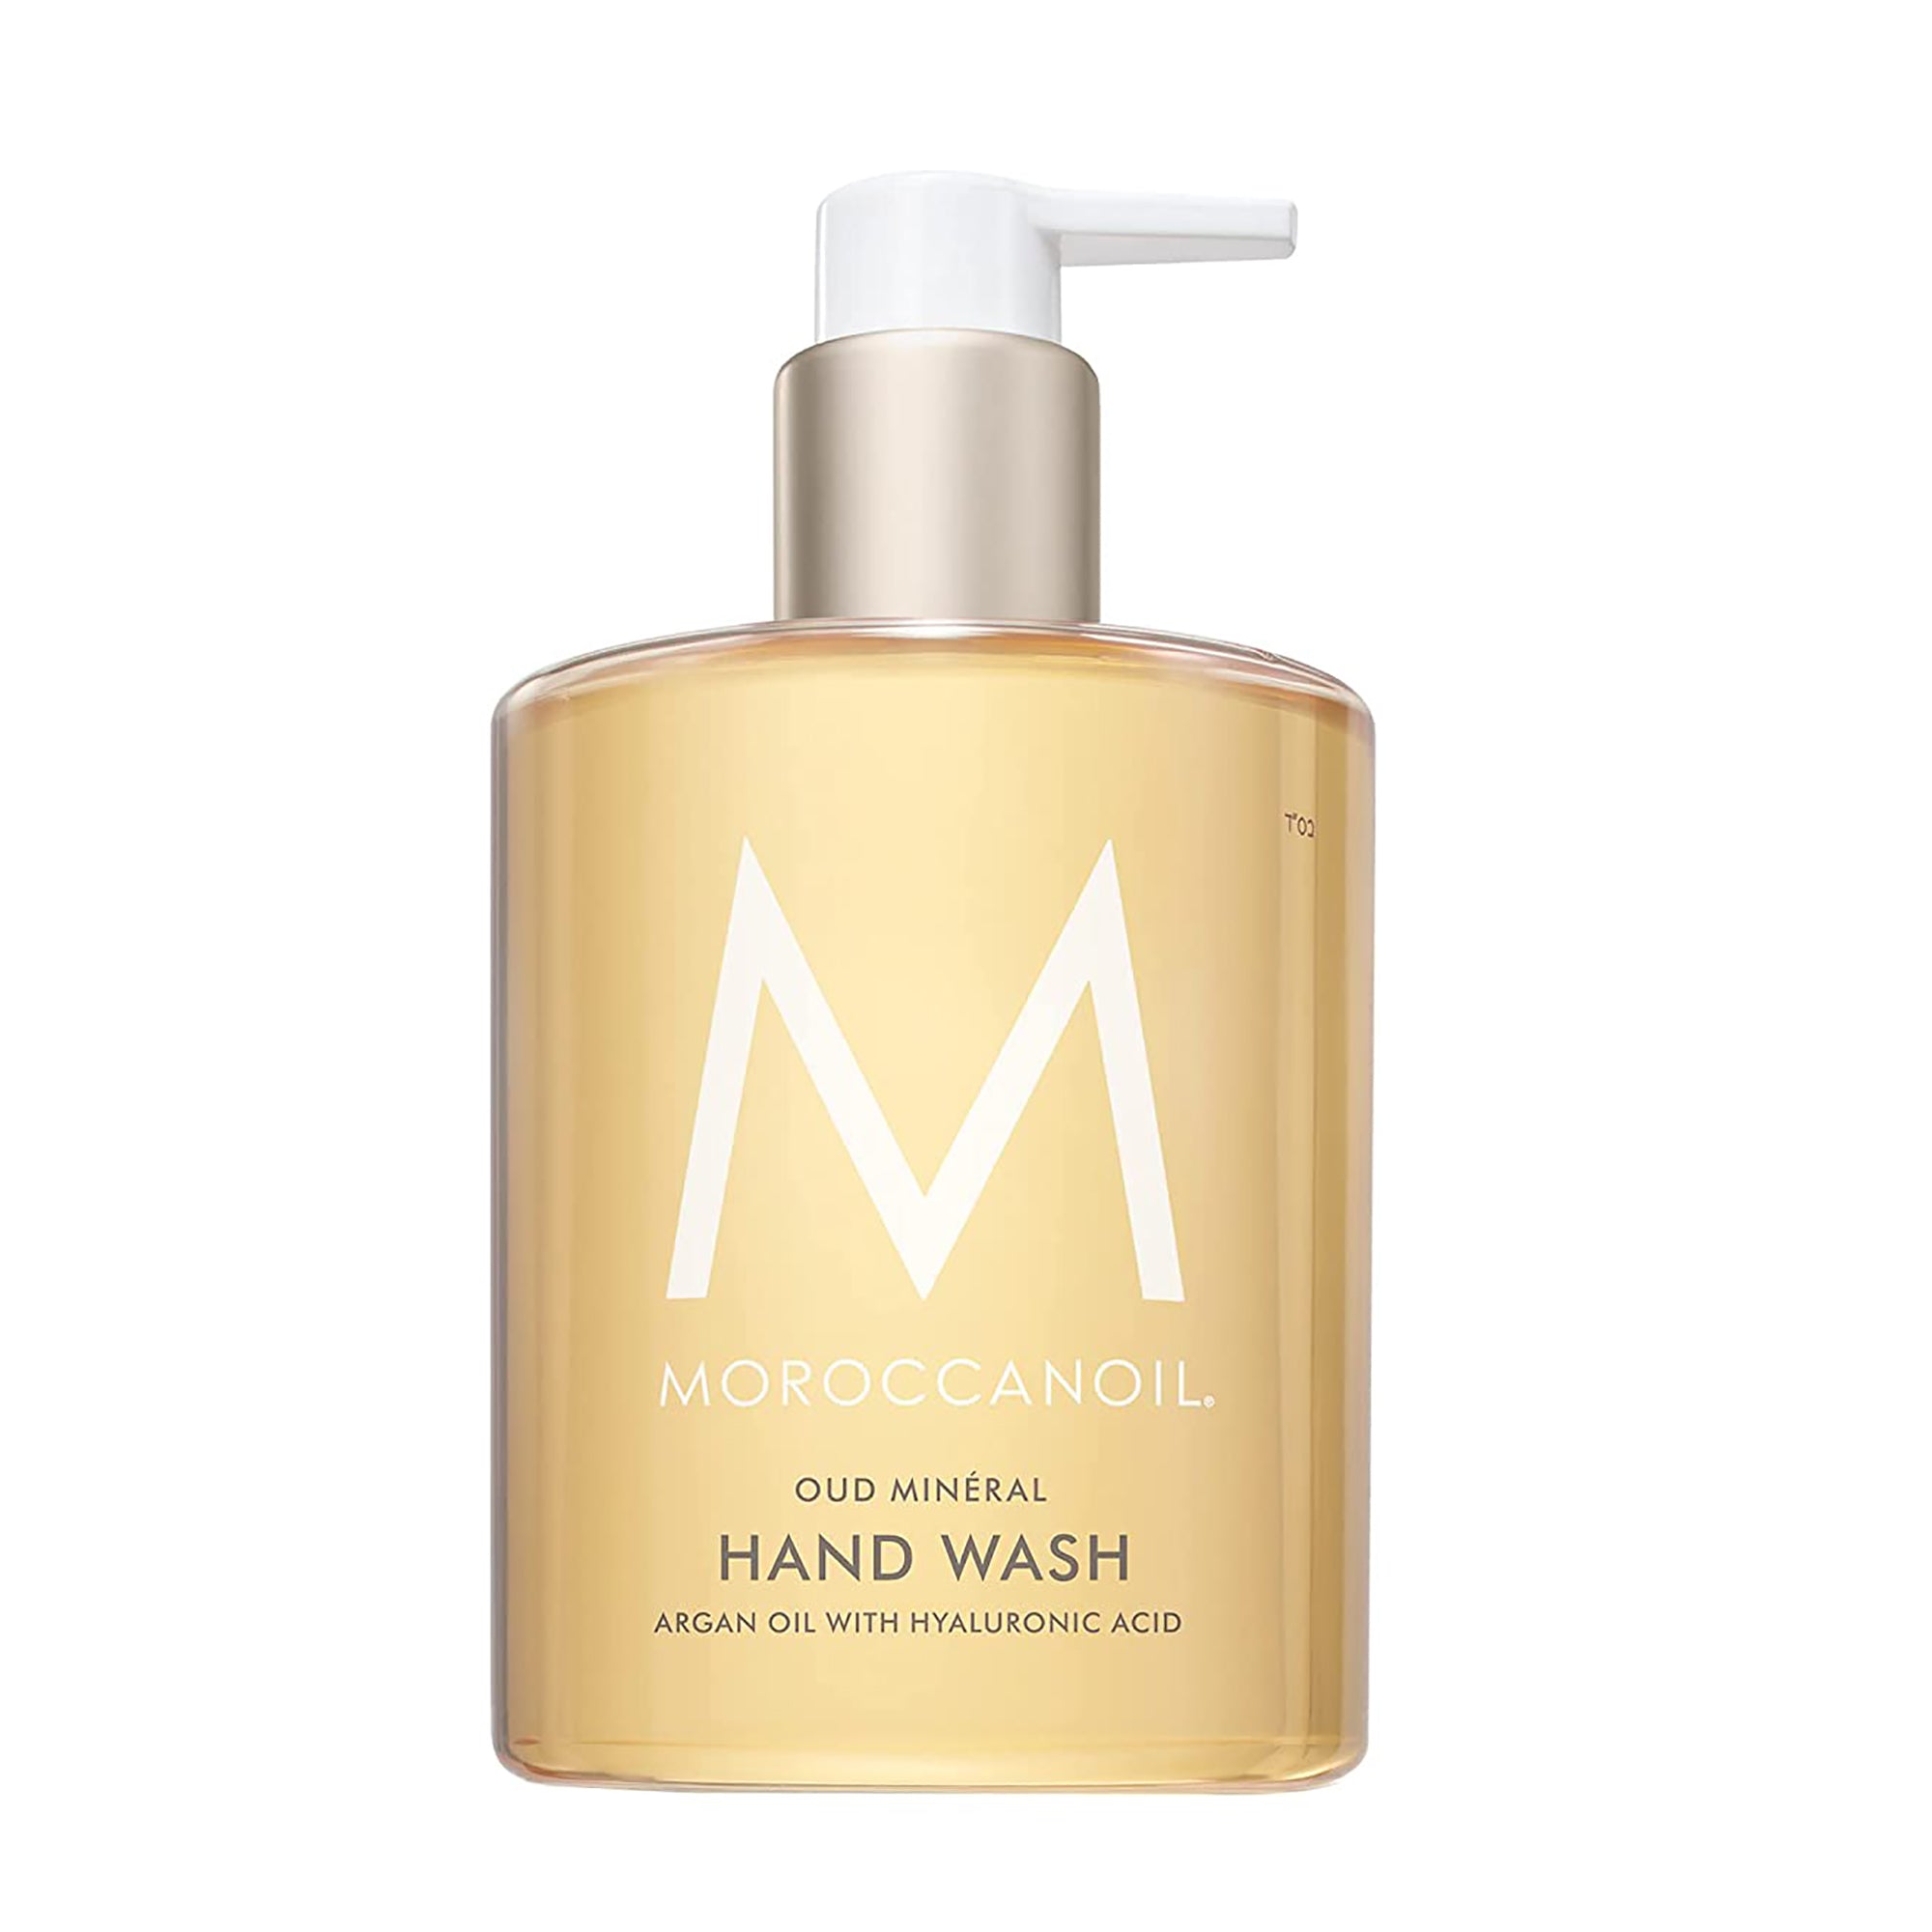 Moroccanoil Hand Wash - Oud Mineral / 12OZ